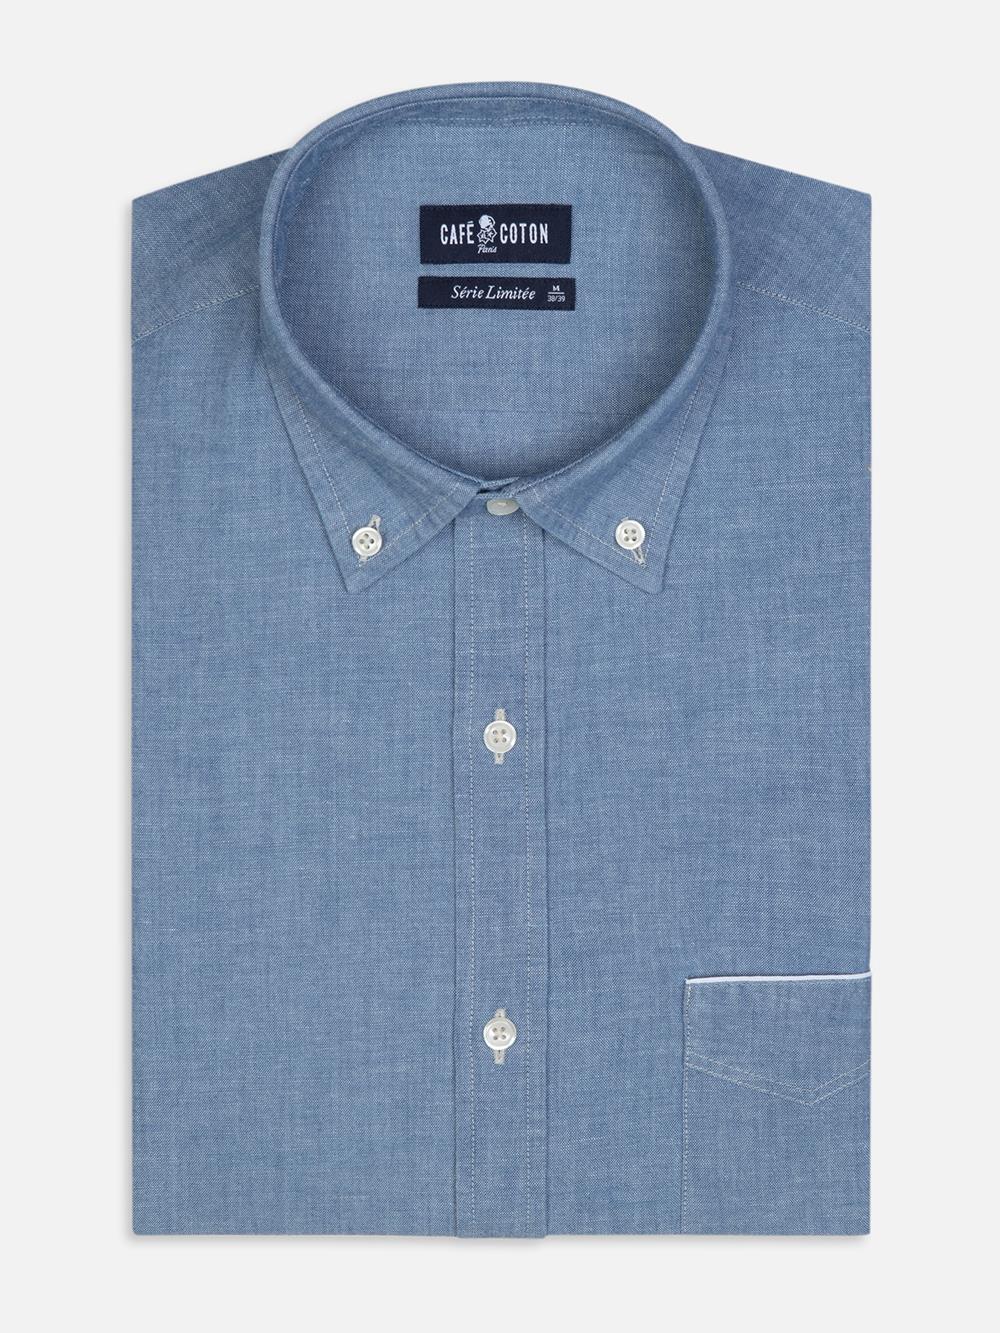 Denim shirt with button-down collar - Limited Edition